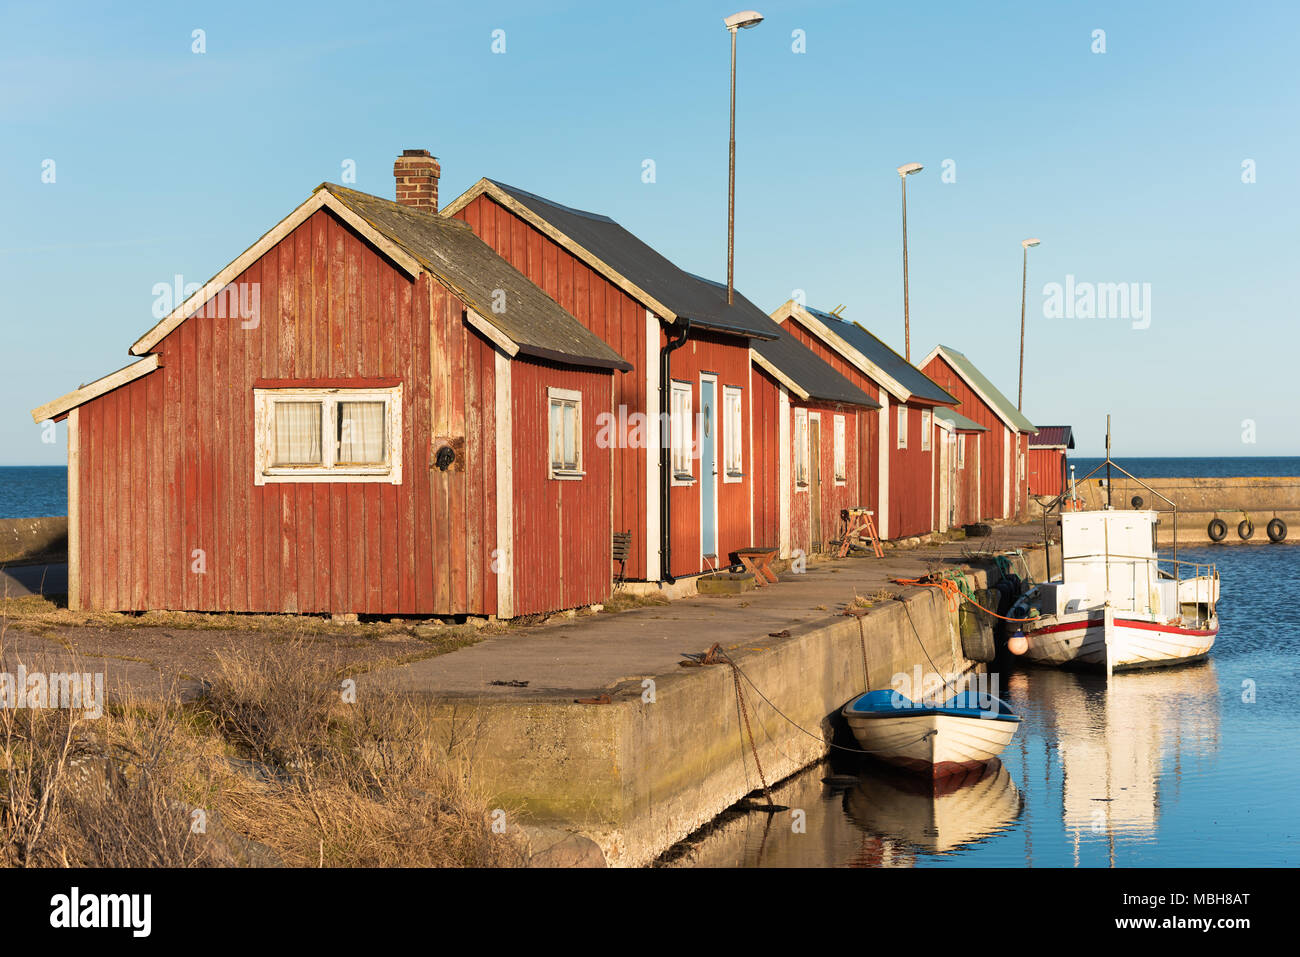 Gammalsby harbor at eastern Oland, Sweden. Small red wooden fishing cabins in a row on the pier with small boats moored dockside in the evening sunlig Stock Photo